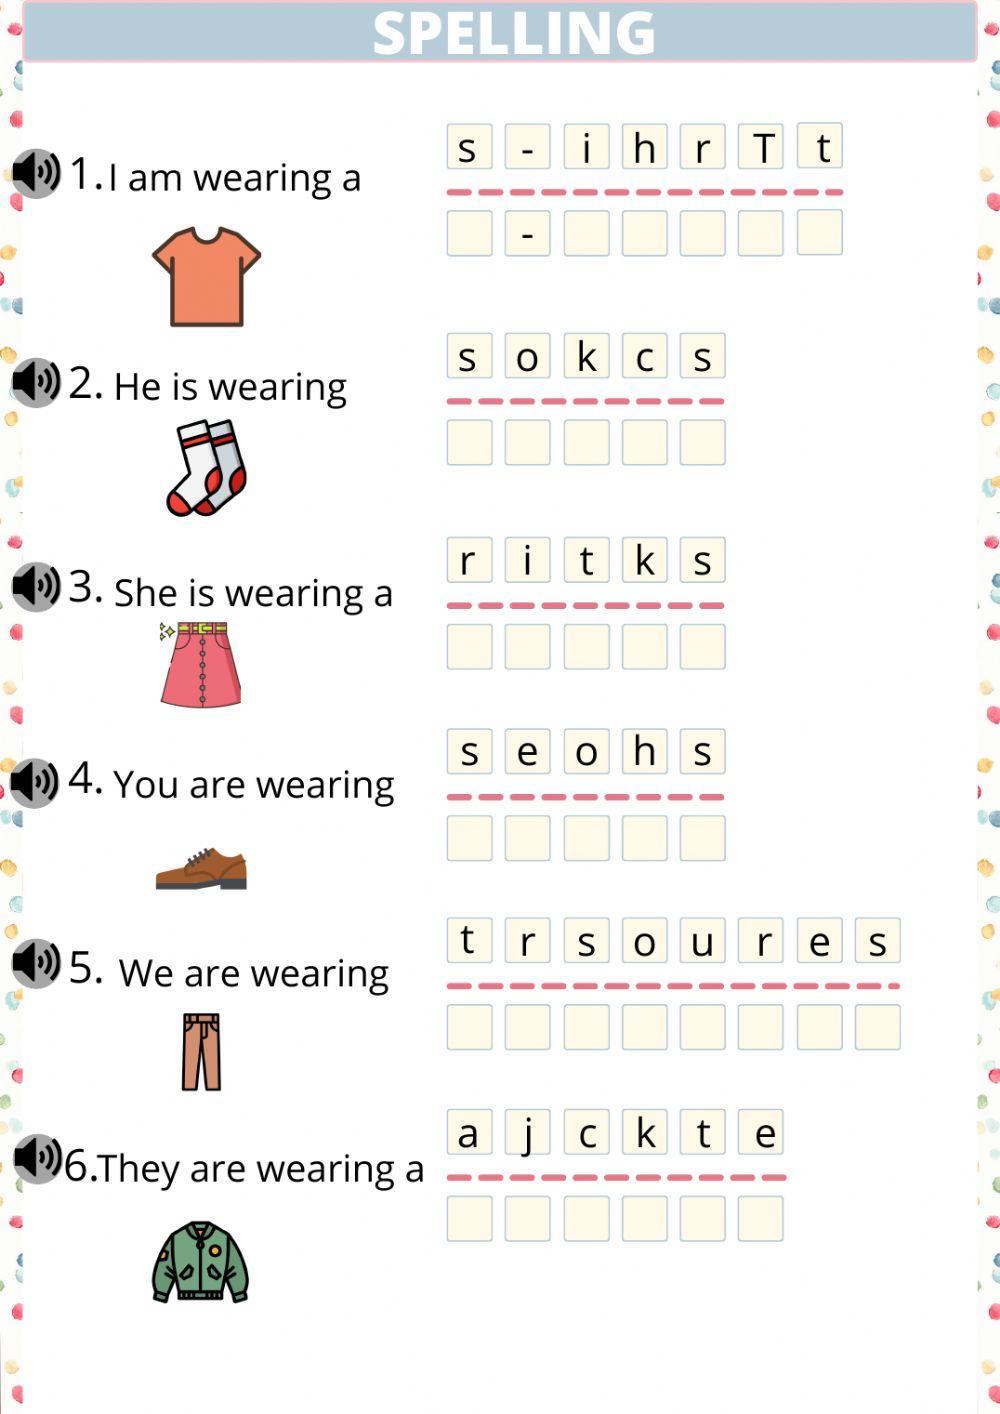 SPELLING clothes